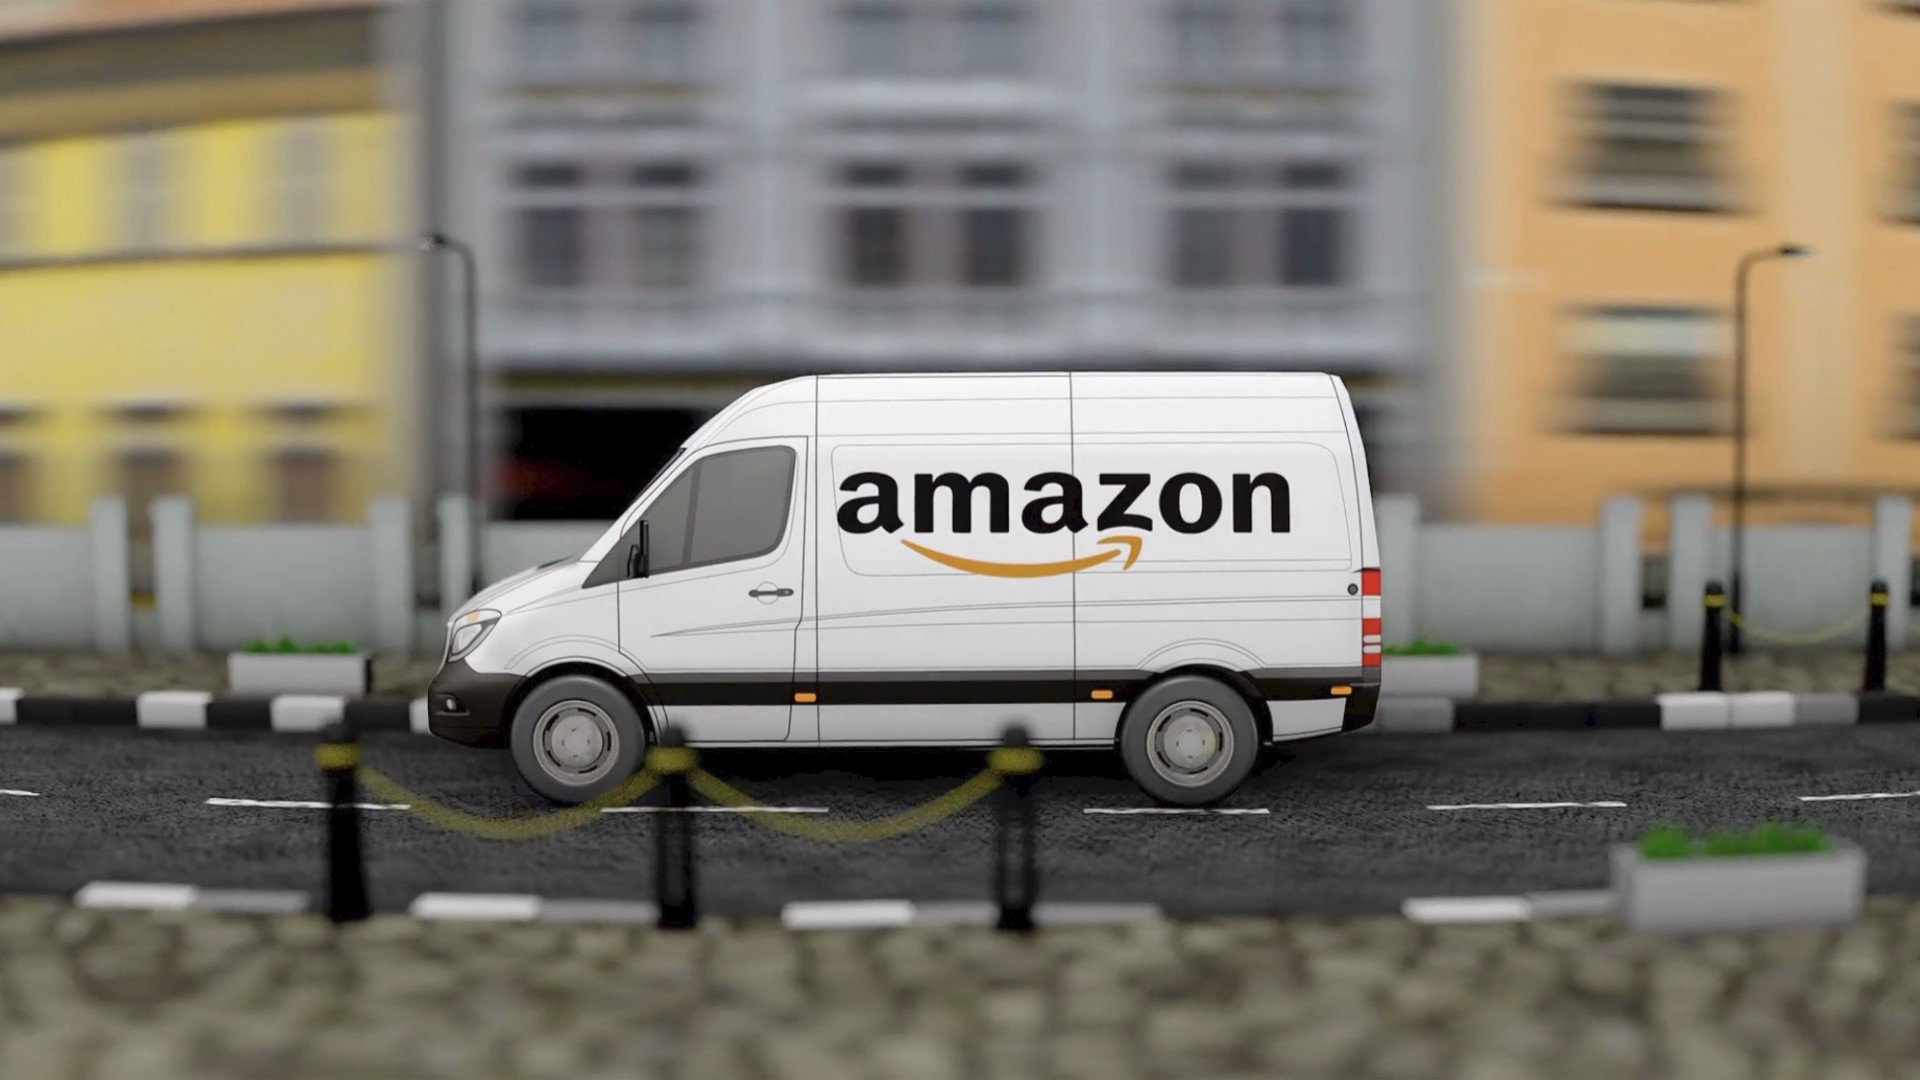 Amazon is making moves that could see the tech giant challenge leaders in the logistics industry. Veuer's Justin Kircher has the story.